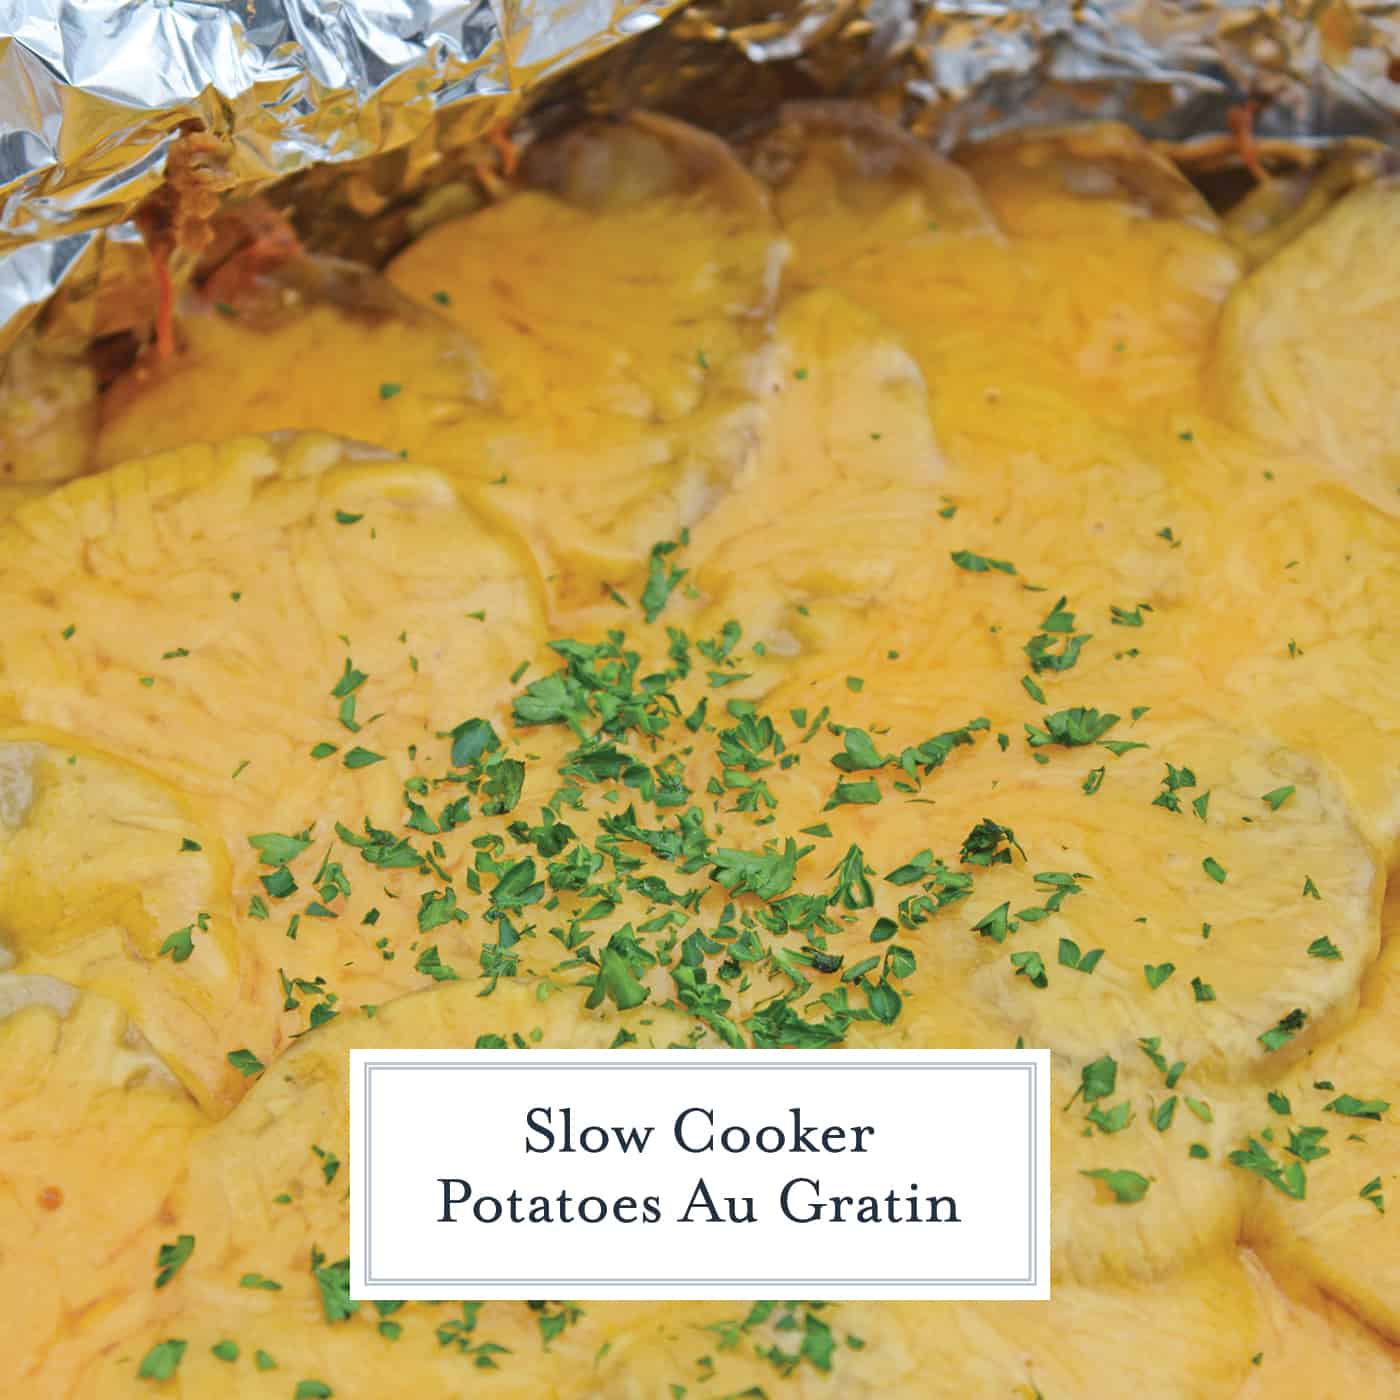 Slow Cooker Potatoes au Gratin are an amazing copycat recipe of Fleming's Steakhouse's potatoes.  Pop it in your slow cooker and reap the cheesy benefits. #slowcookerpotatoesaugratin #potatoesaugratin www.savoryexperiments.com